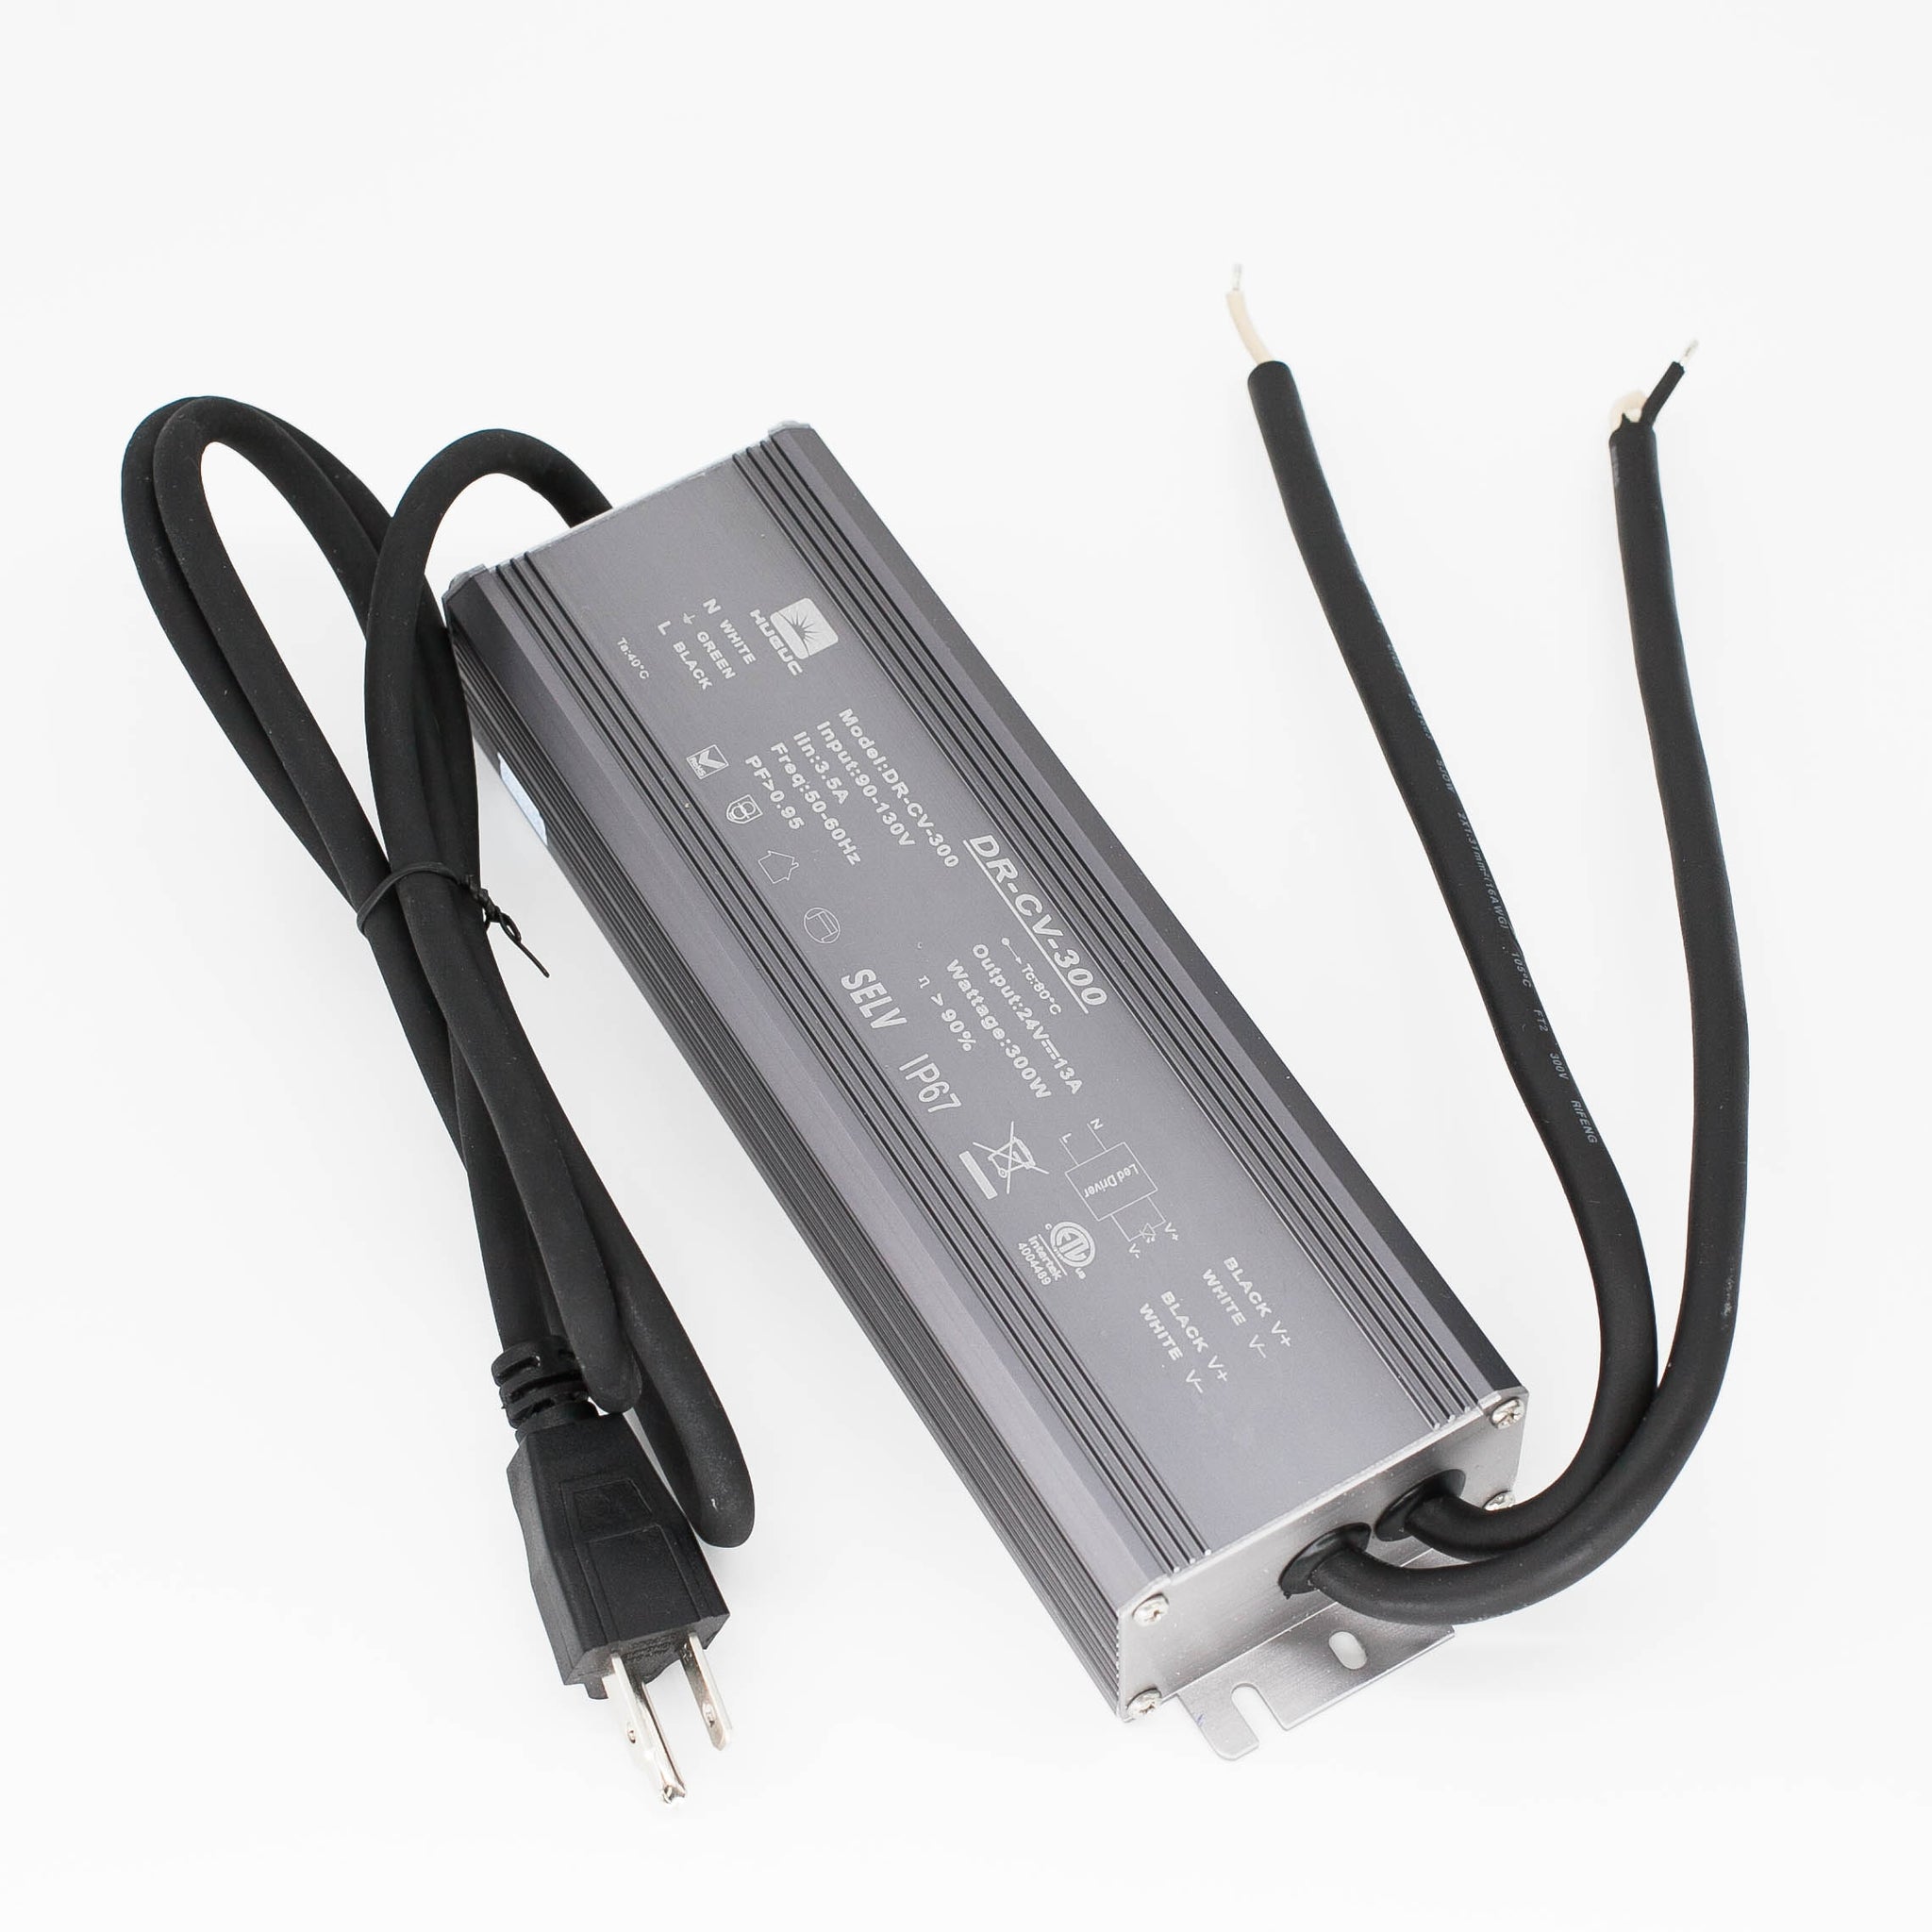 24V 300W Dimmable CV DC LED Driver Transformer UL Approved - 3